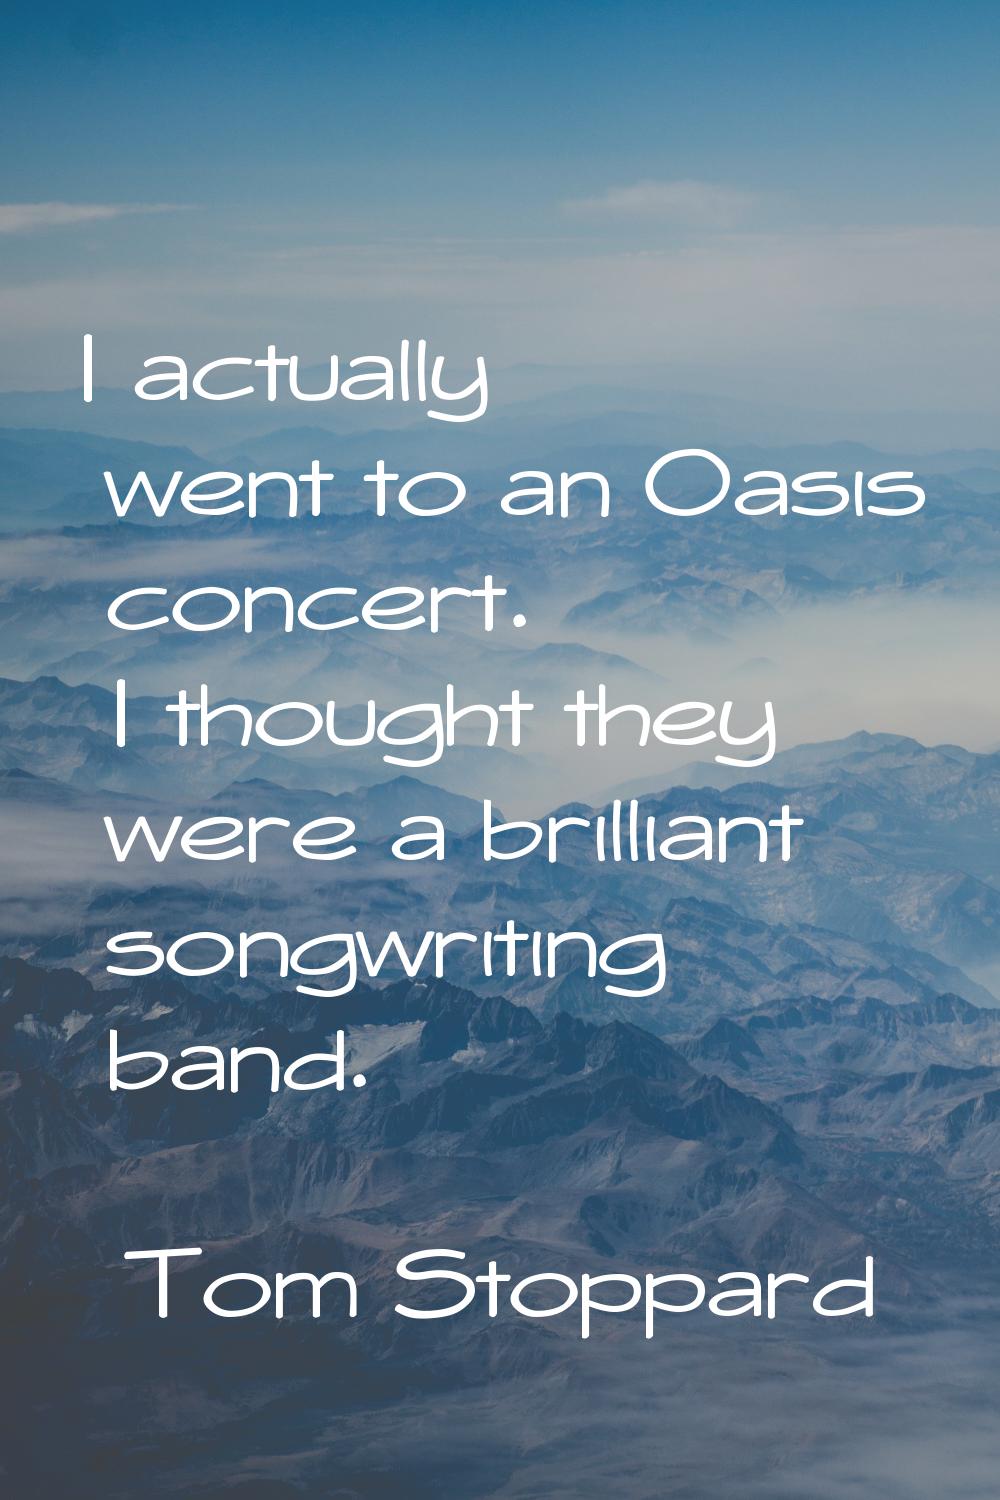 I actually went to an Oasis concert. I thought they were a brilliant songwriting band.